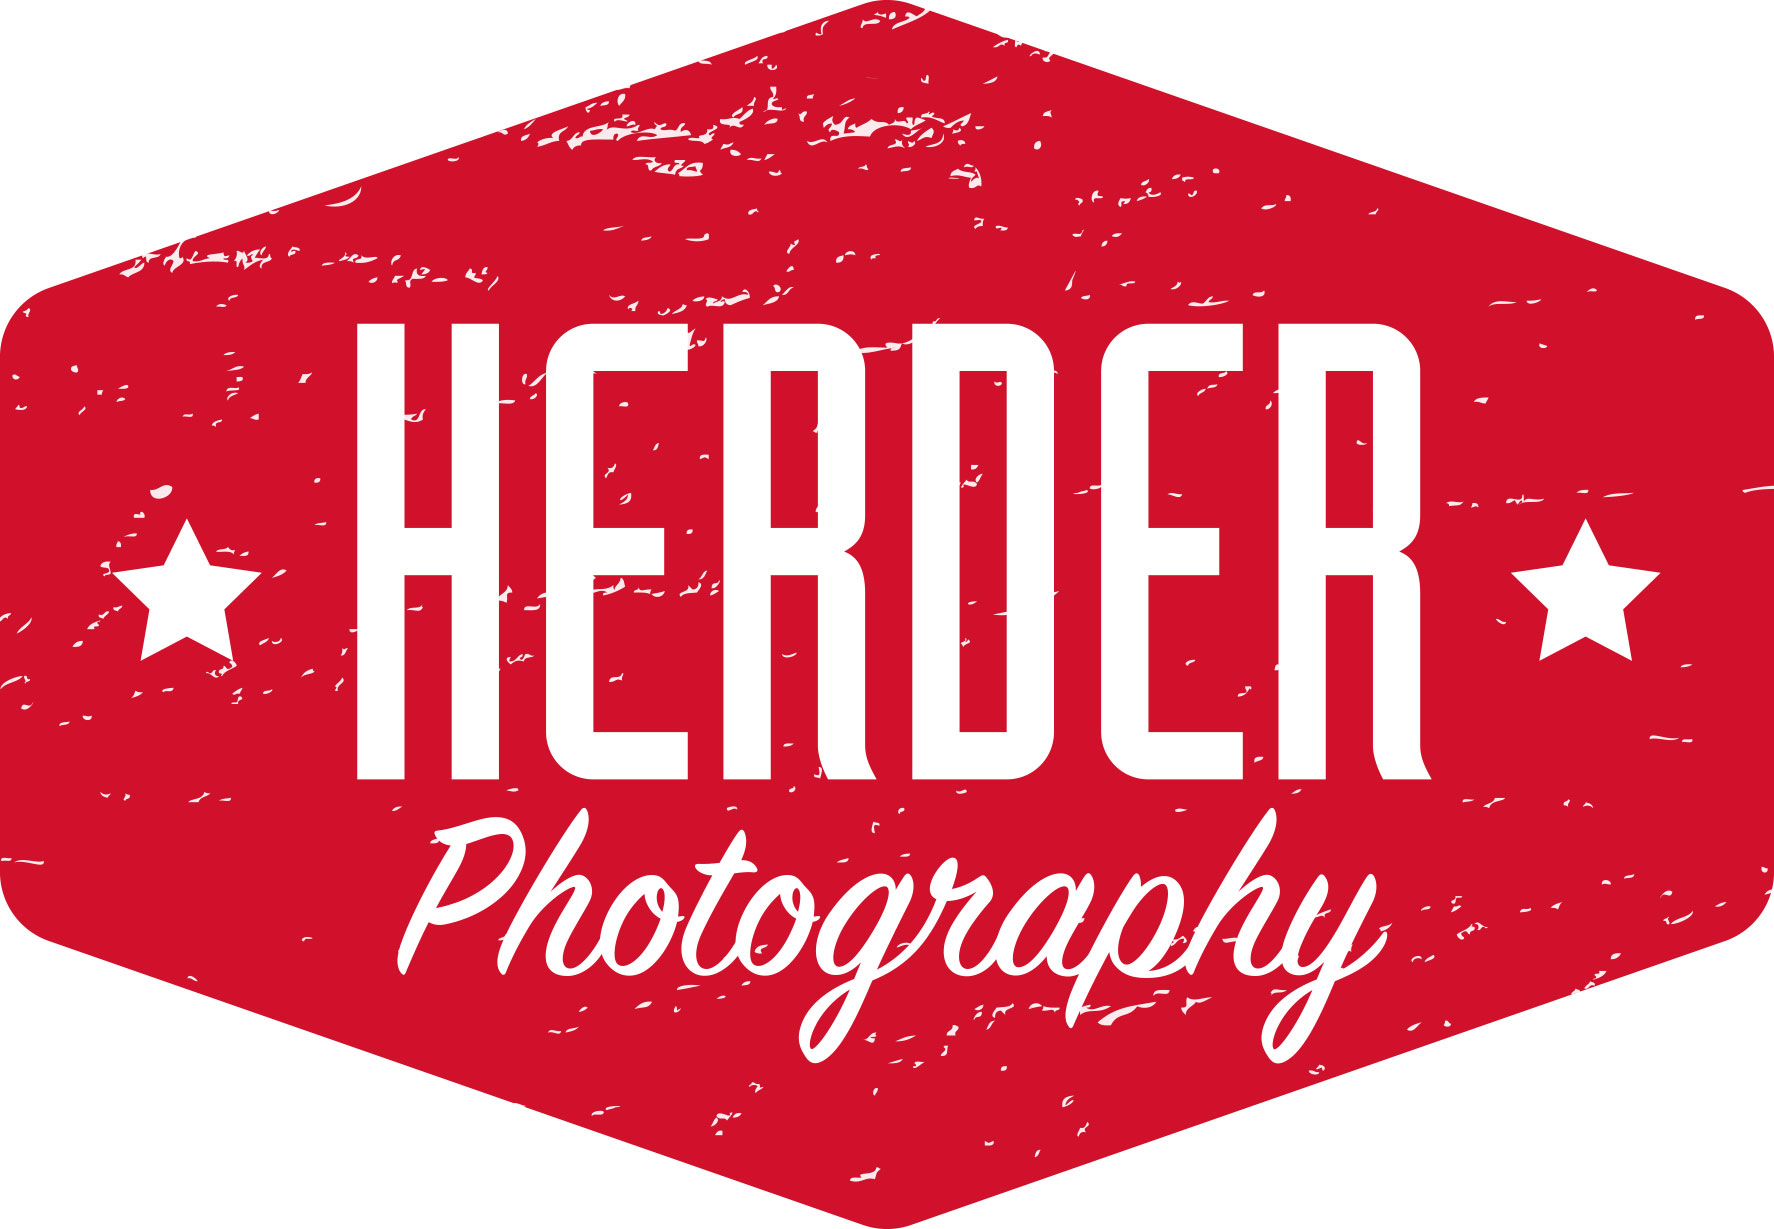 Herder Photography